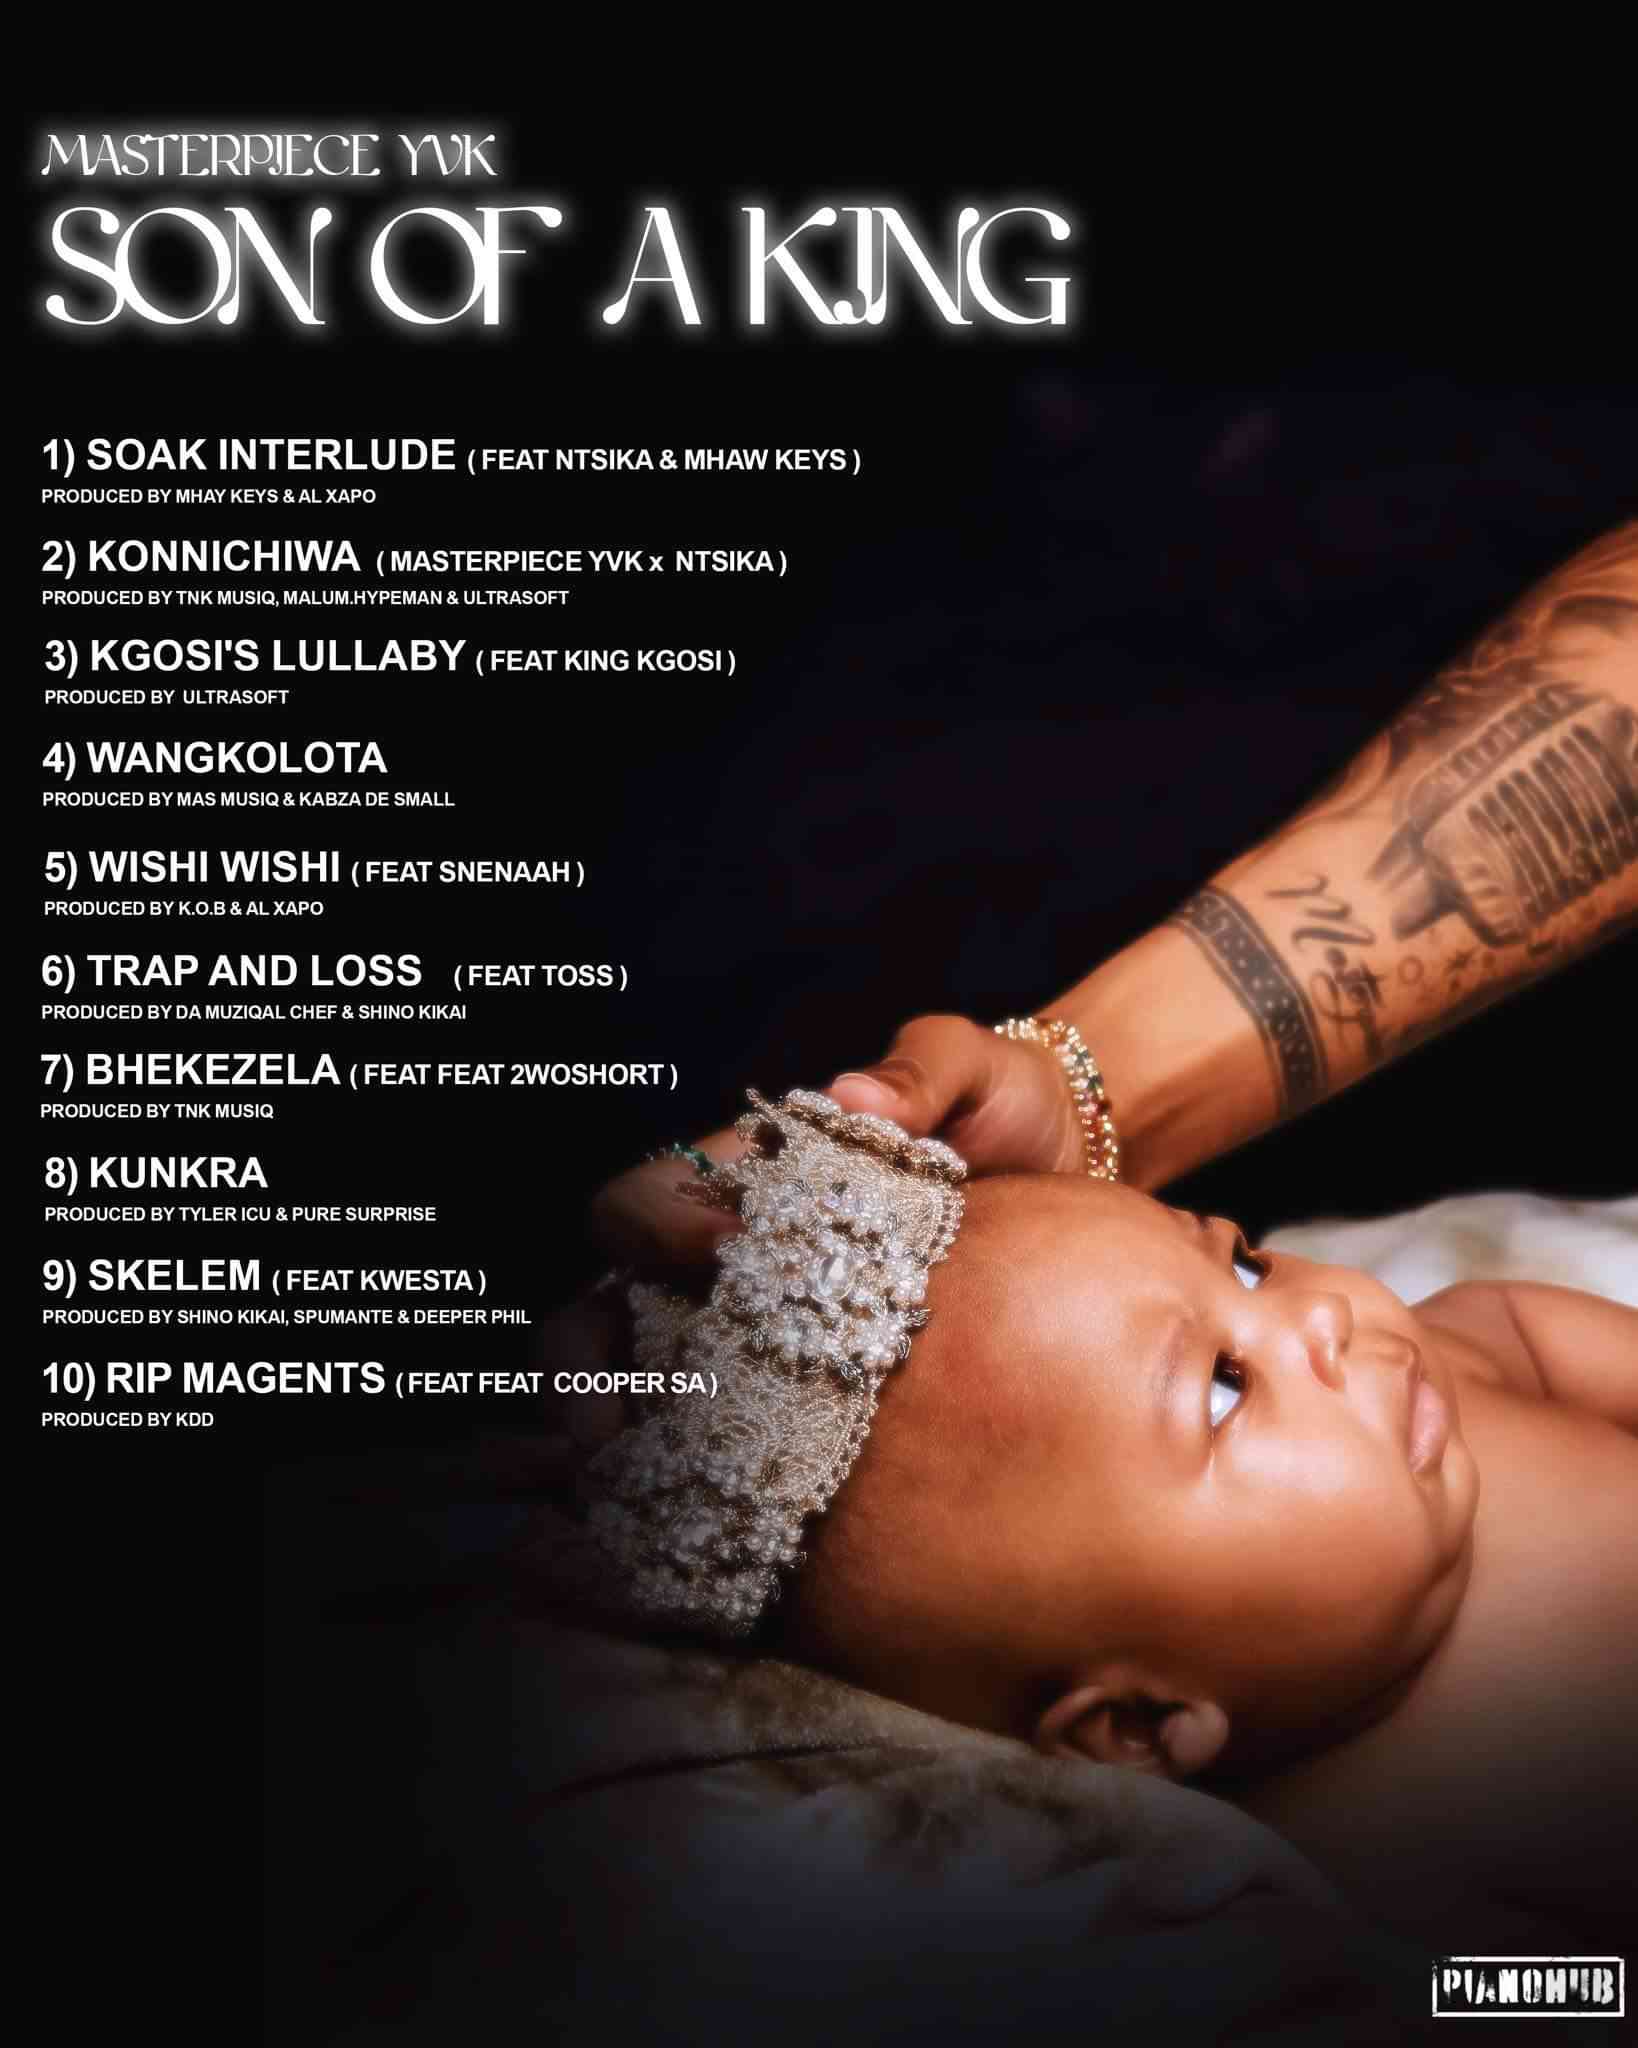 Masterpiece YVK Reveals Tracklist For "Son Of A King Album" 